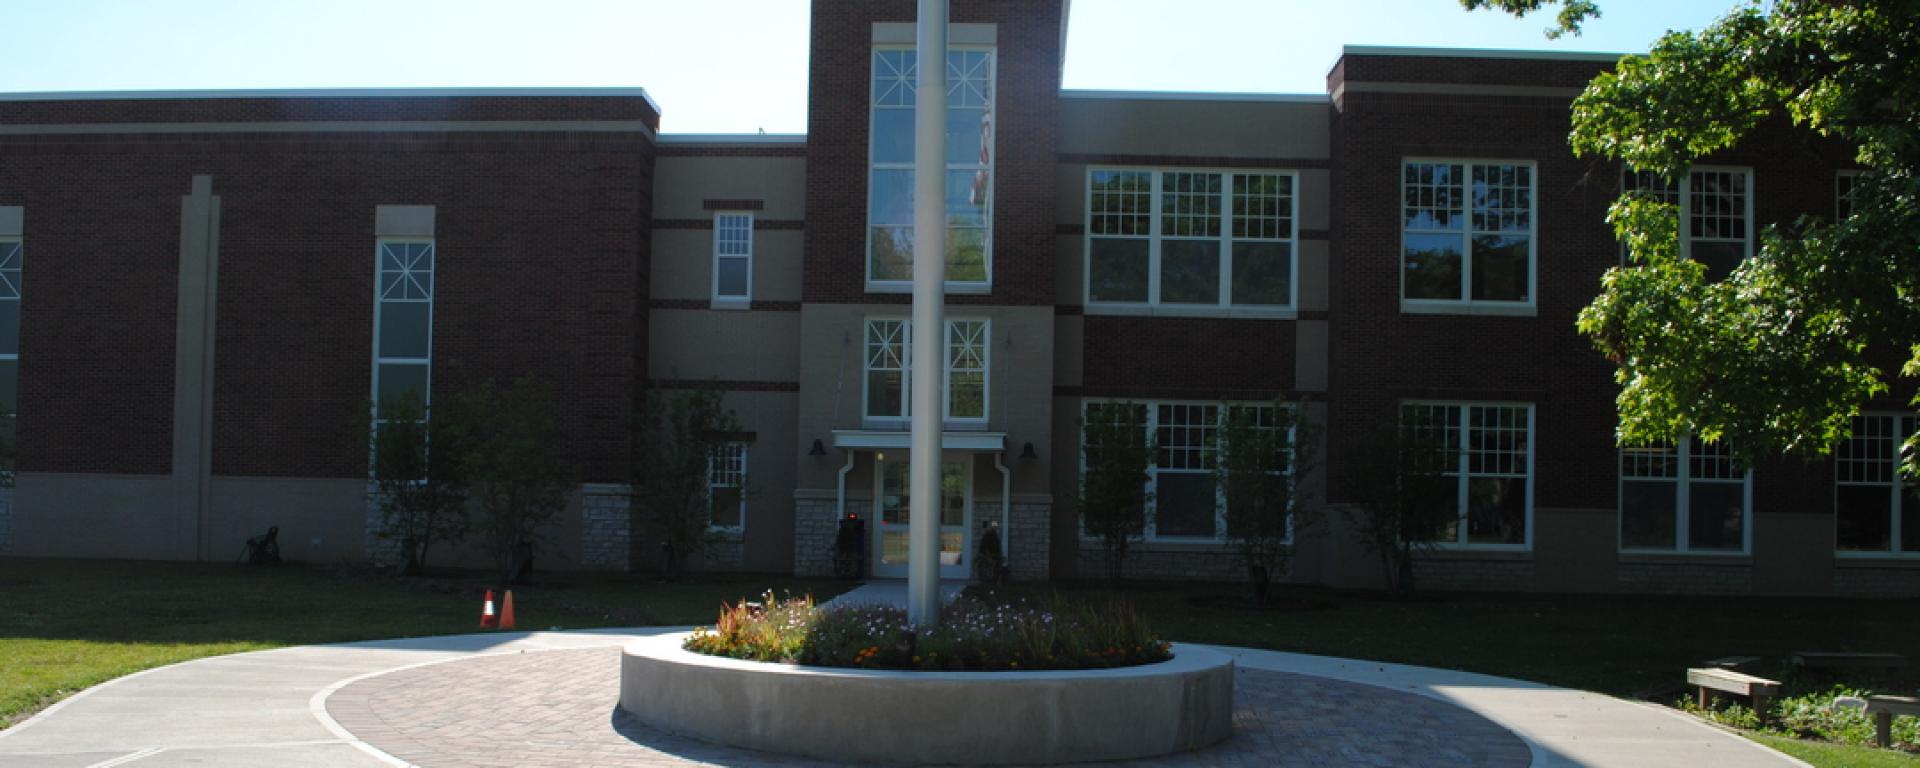 Terrace Park Elementary Learning Campus